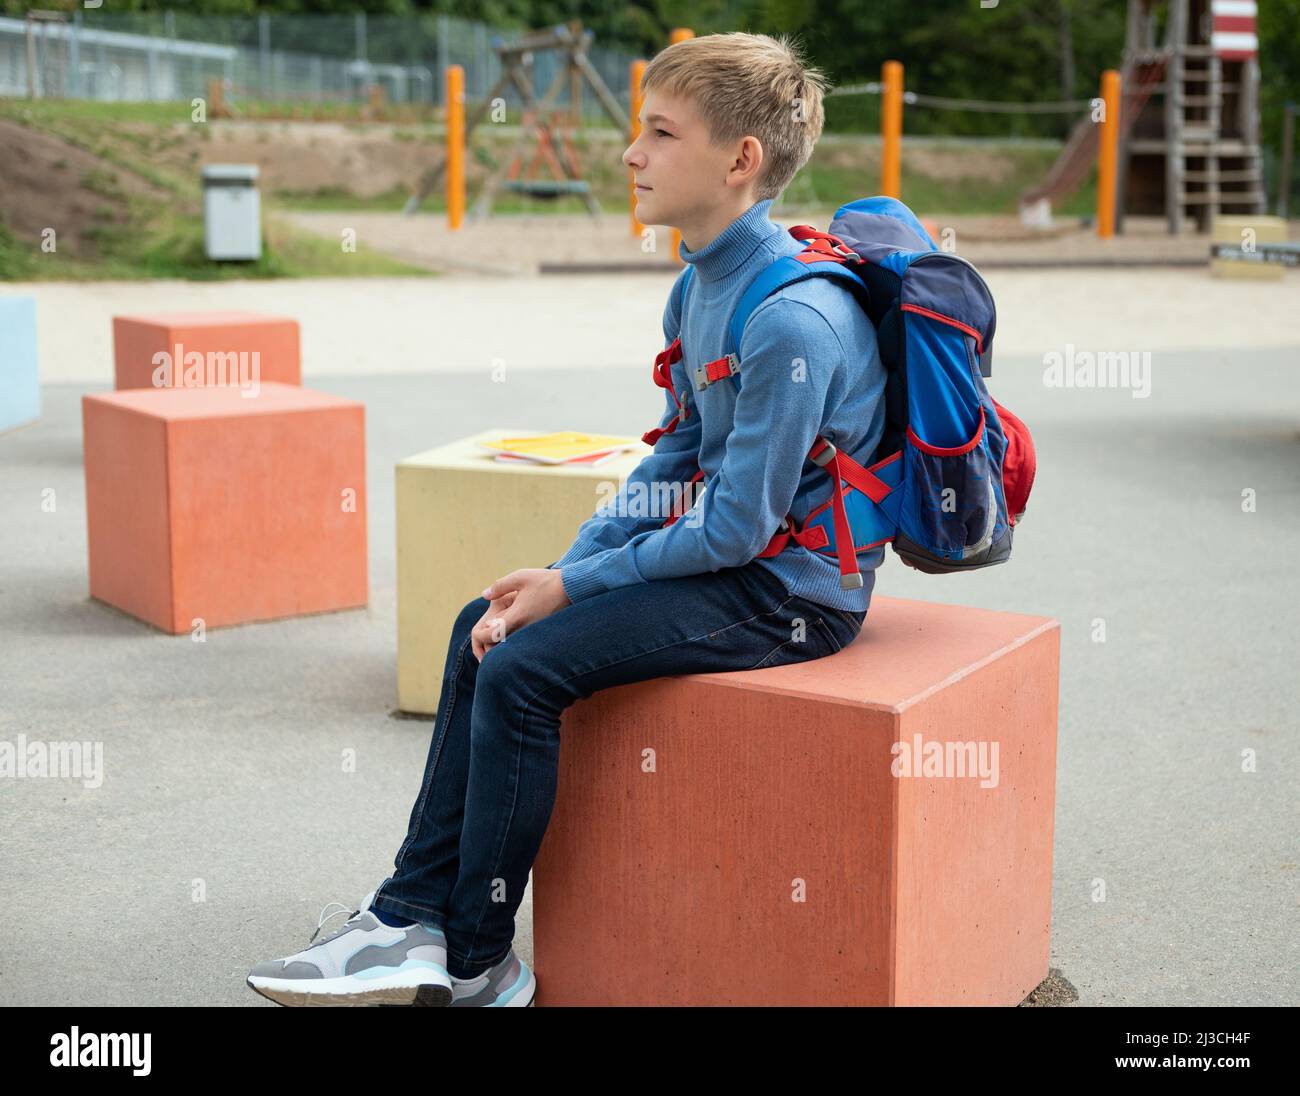 Teen schoolboy with backpack sitting in the school yard after classes Stock Photo